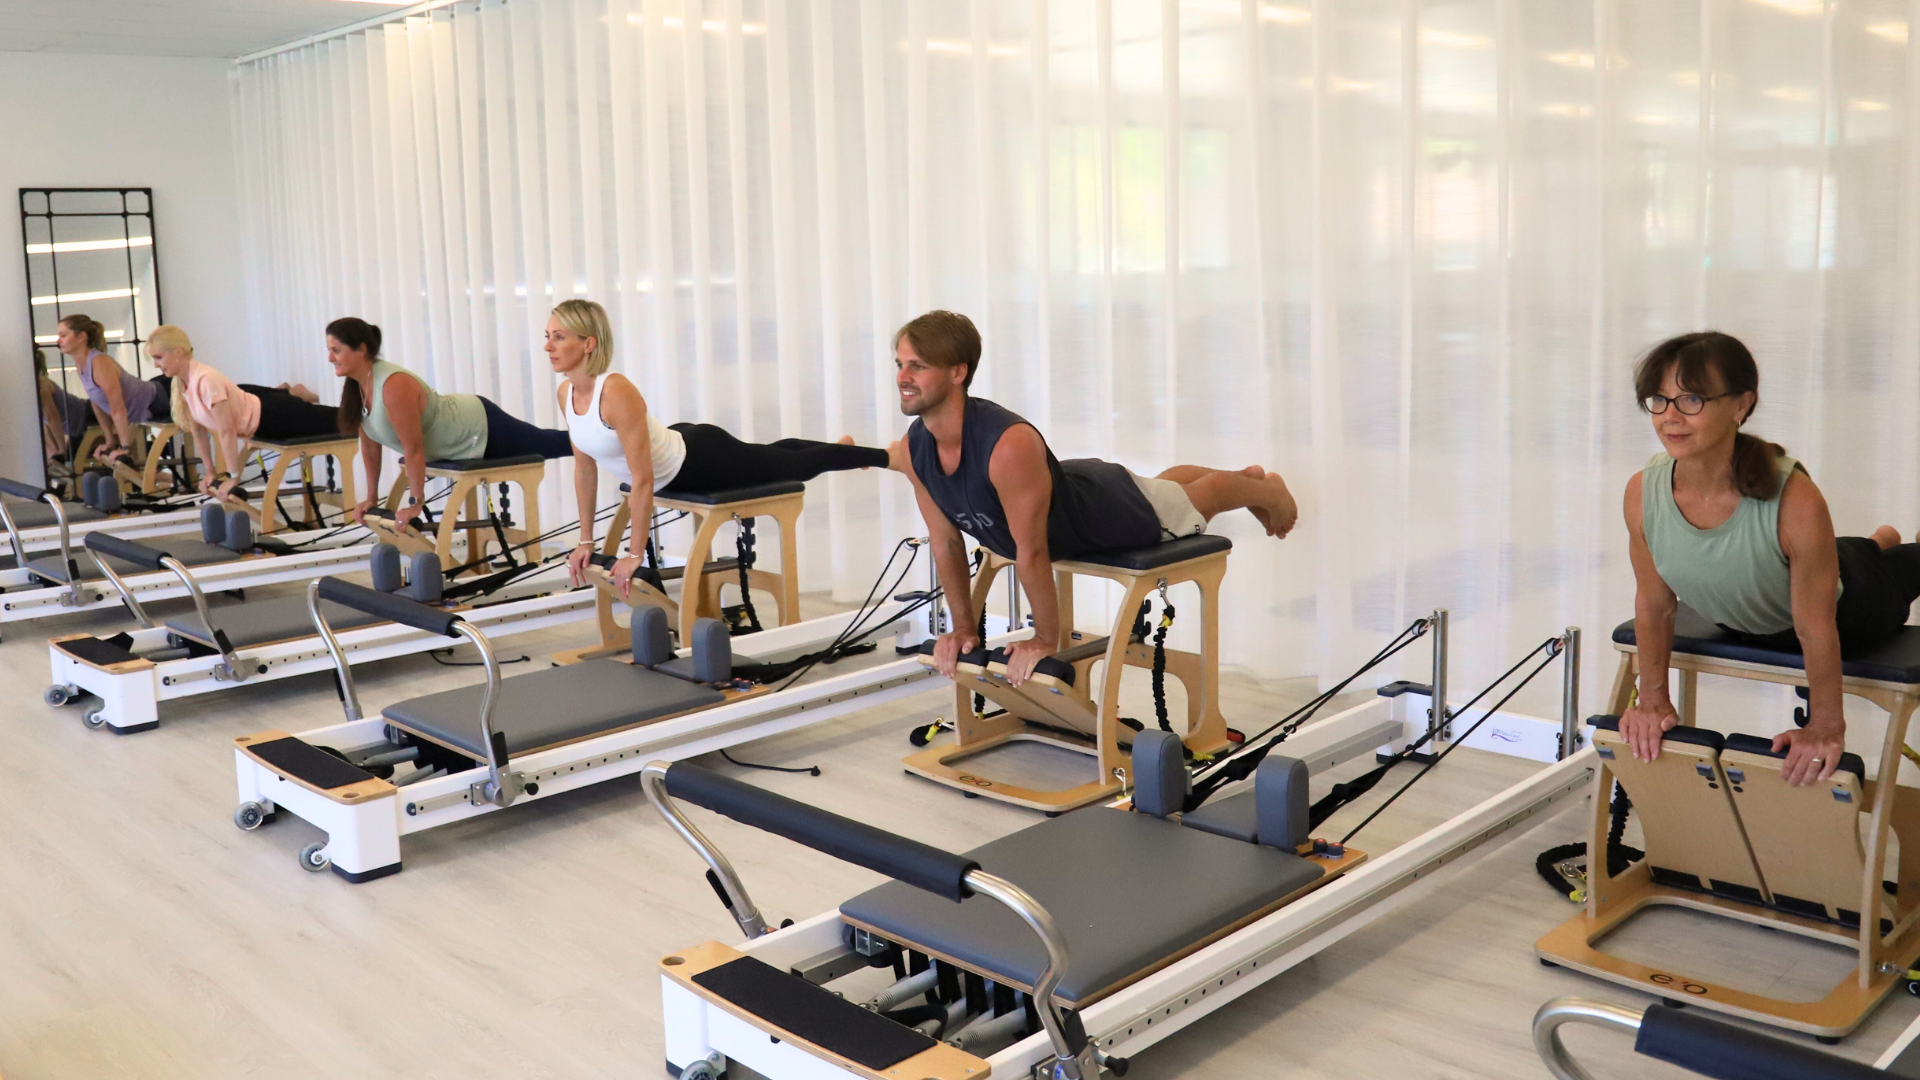 Pricing, Sessions Pilates, Private Pilates